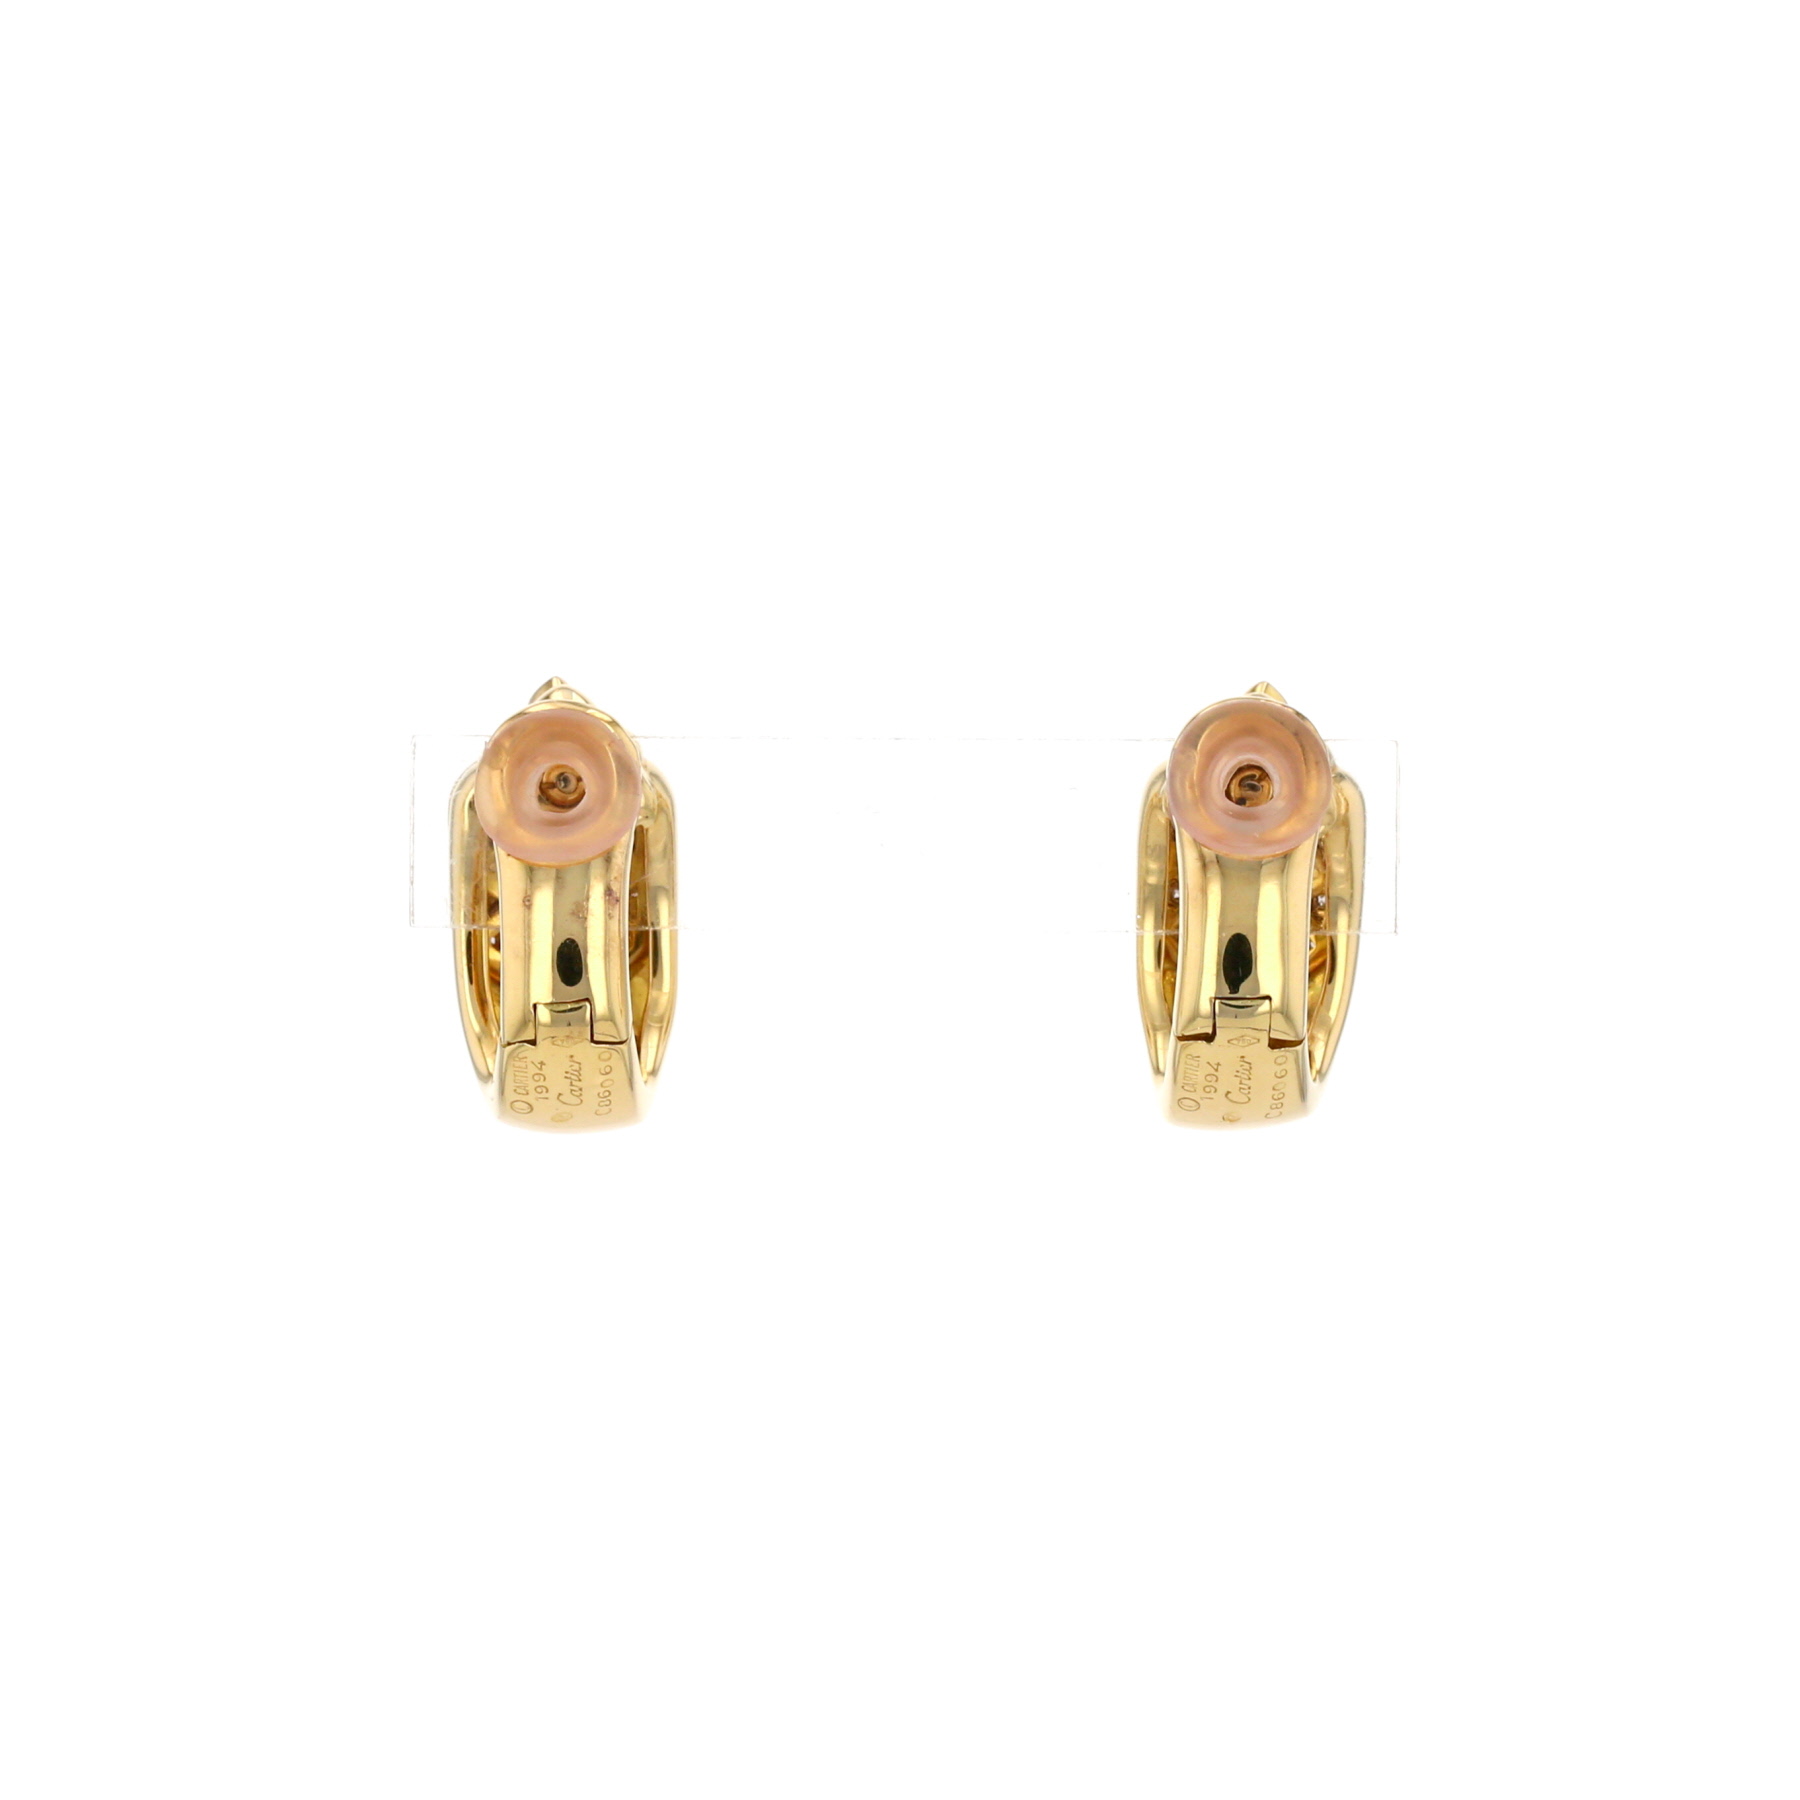 Byzantine Earrings In Yellow , Diamonds And Colored Stones